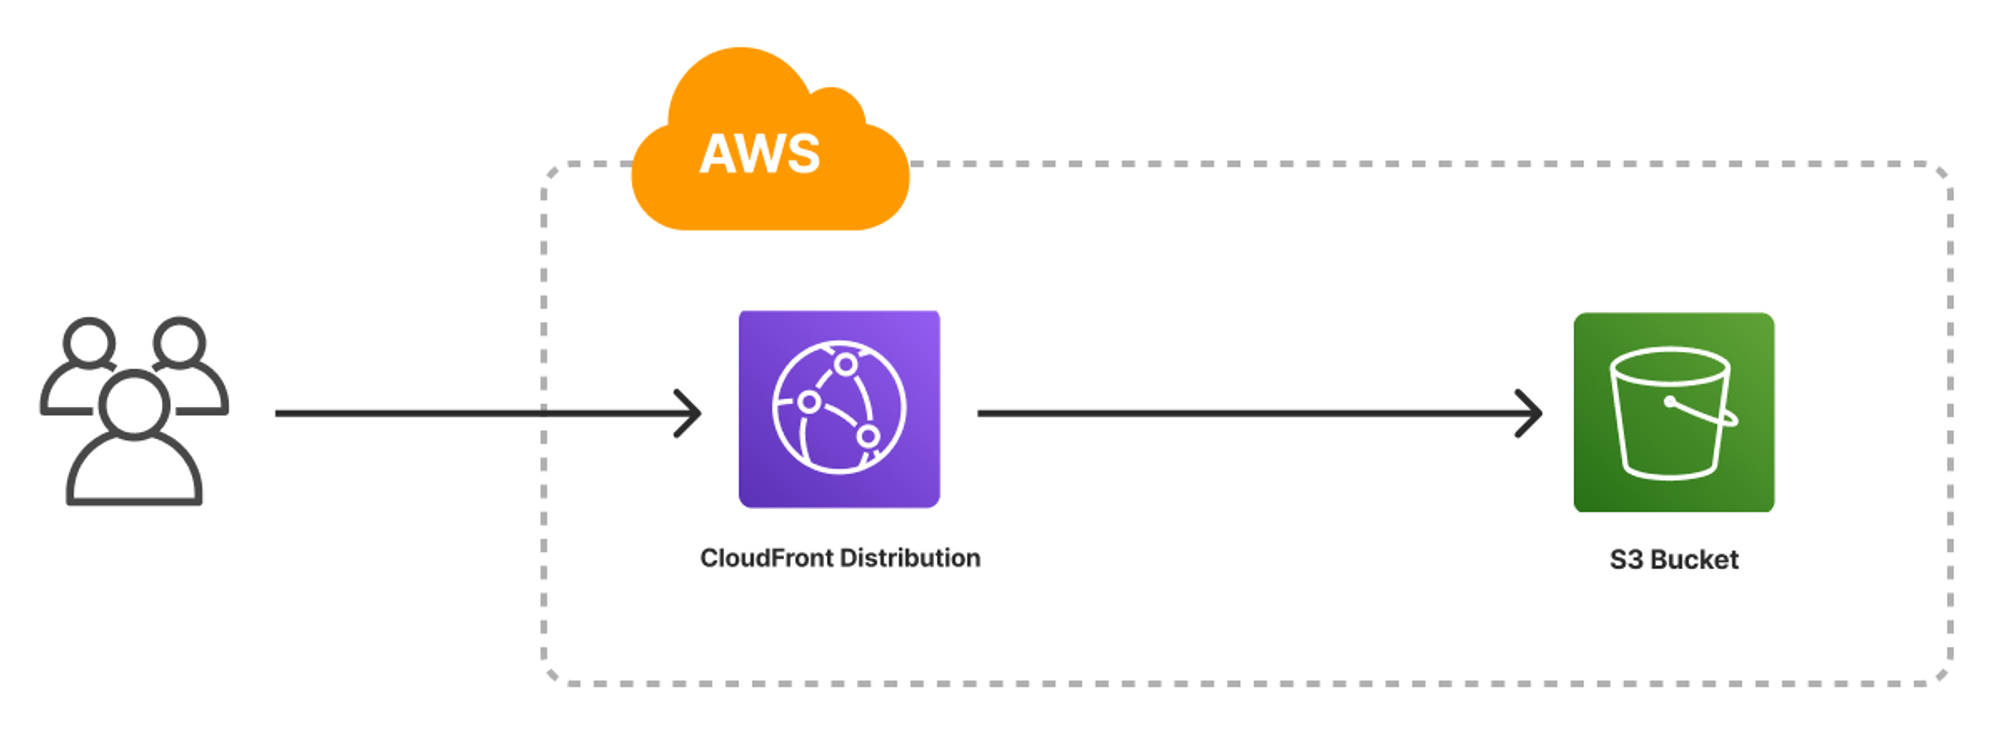 How to deploy React/Vue/Svelte based webapp to AWS using S3 & CloudFront